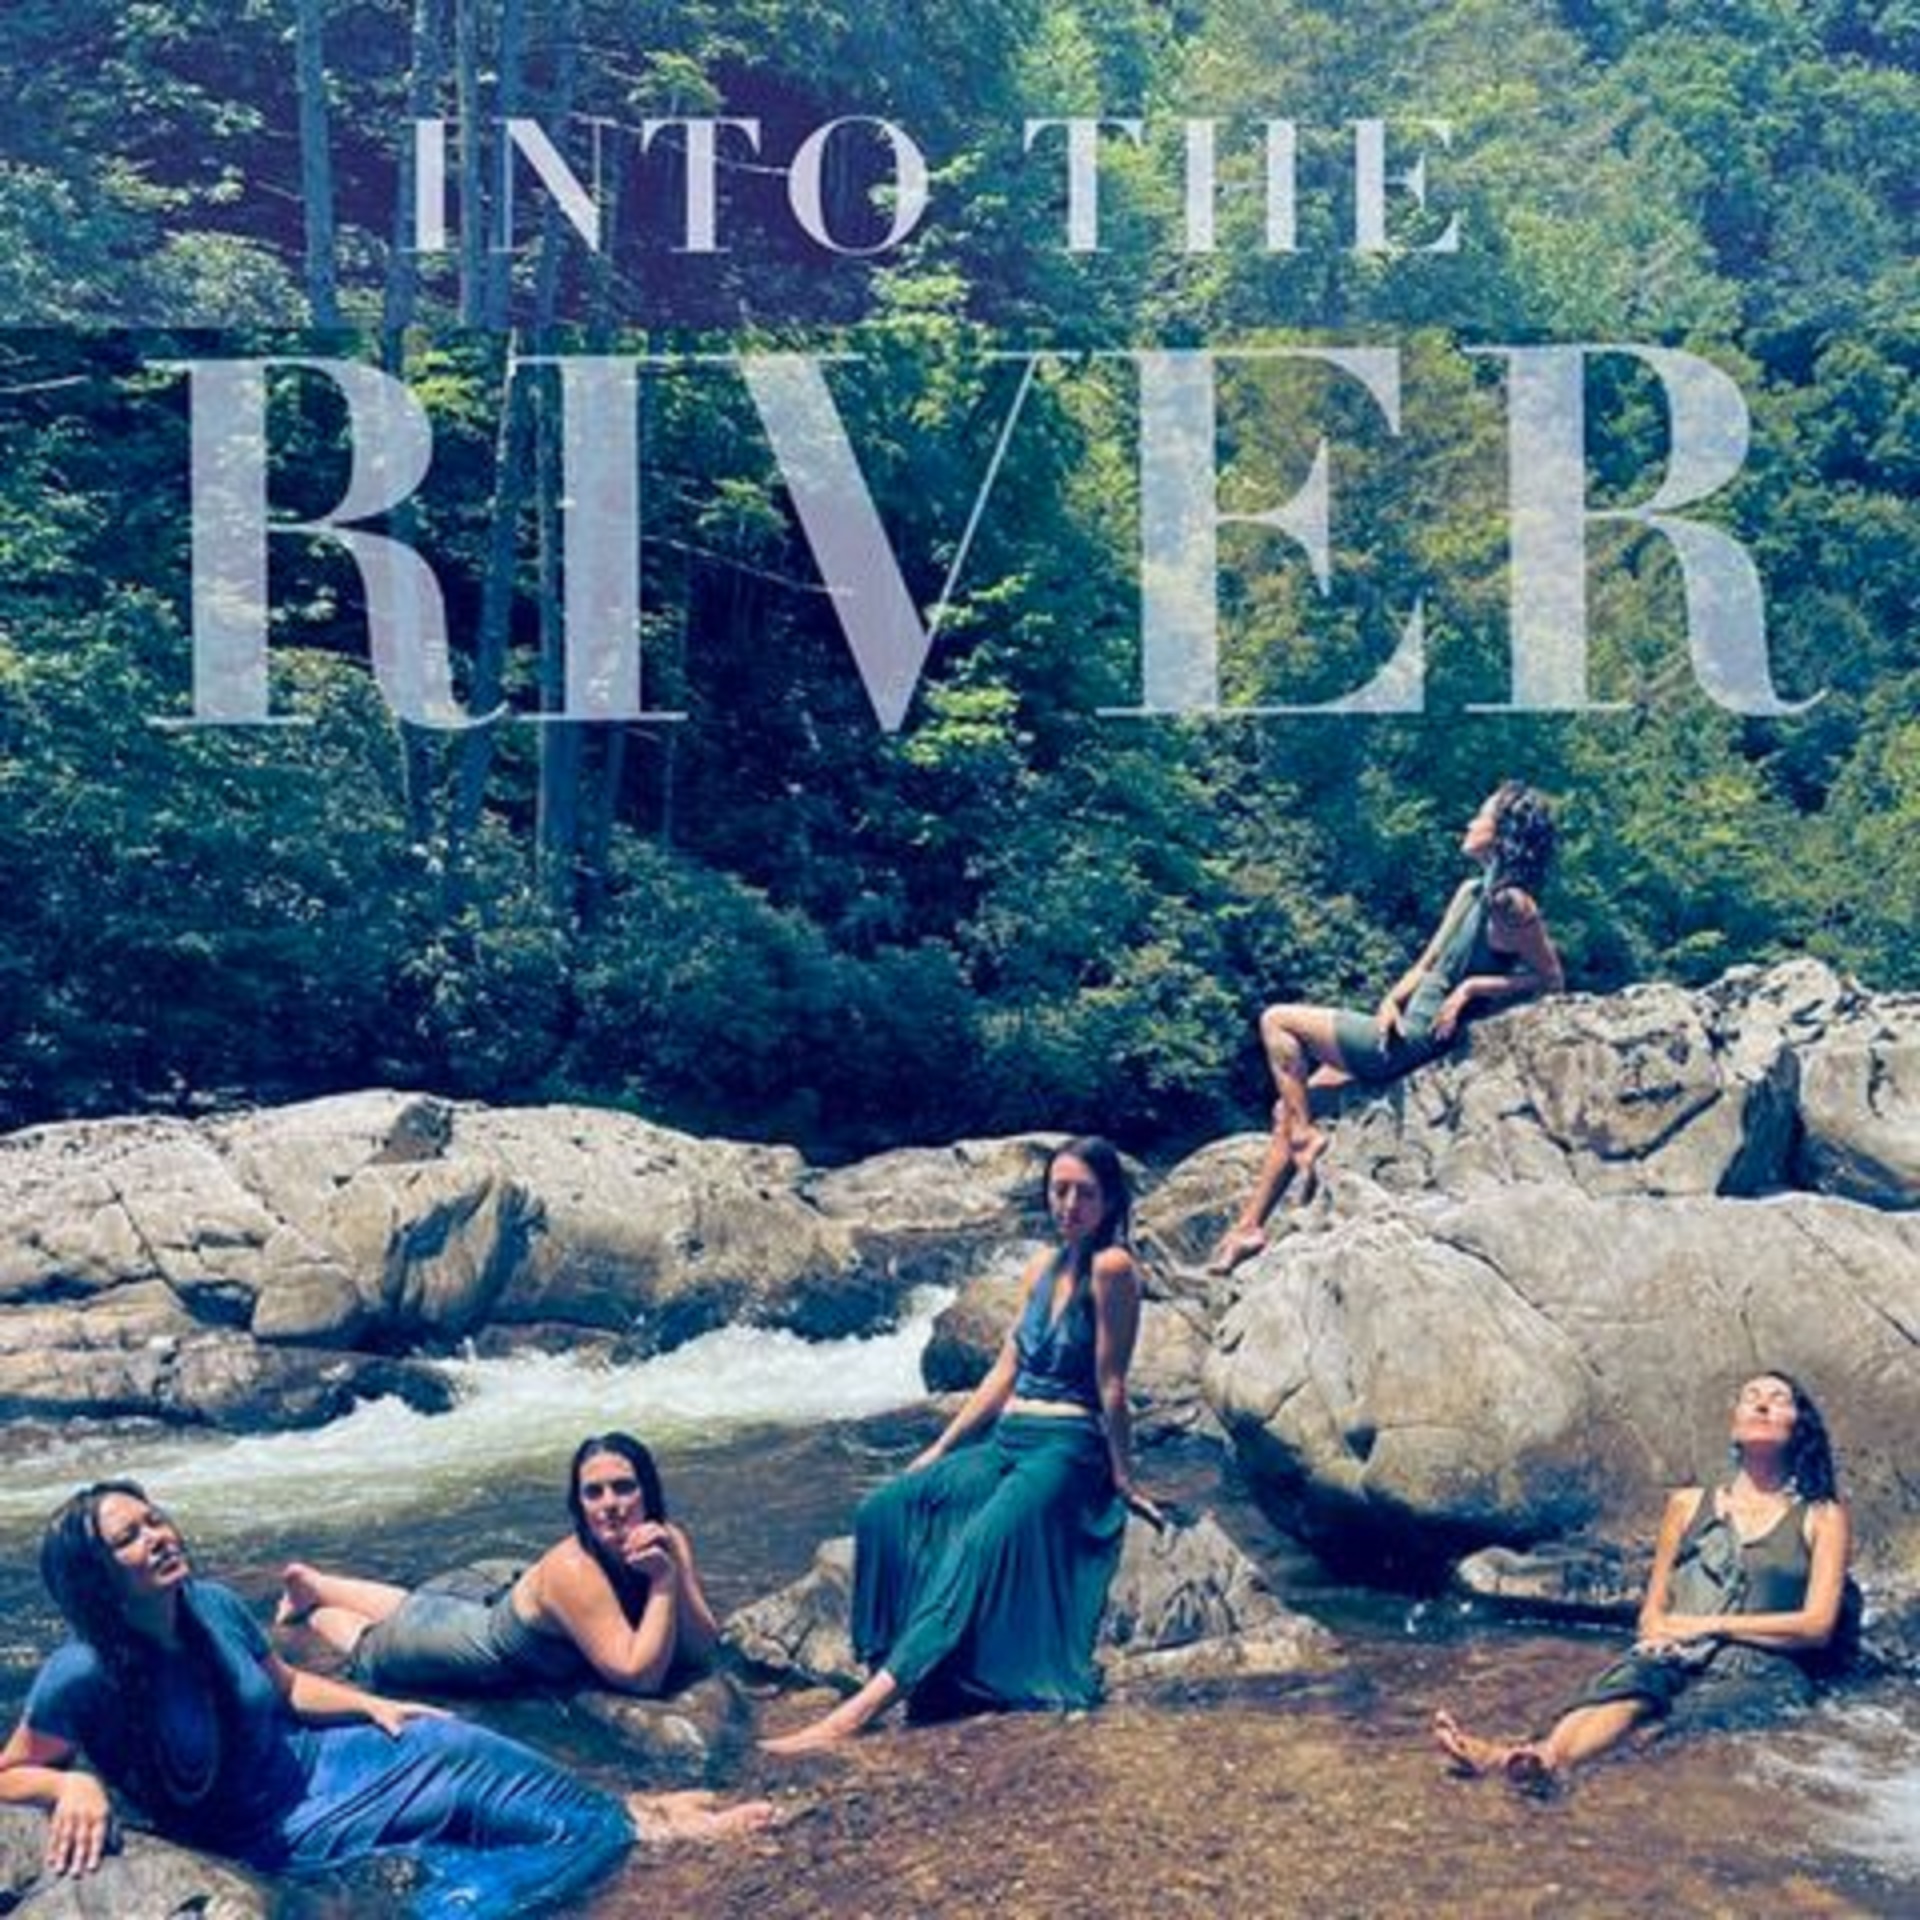 Starling Arrow Releases "Into The River" Single